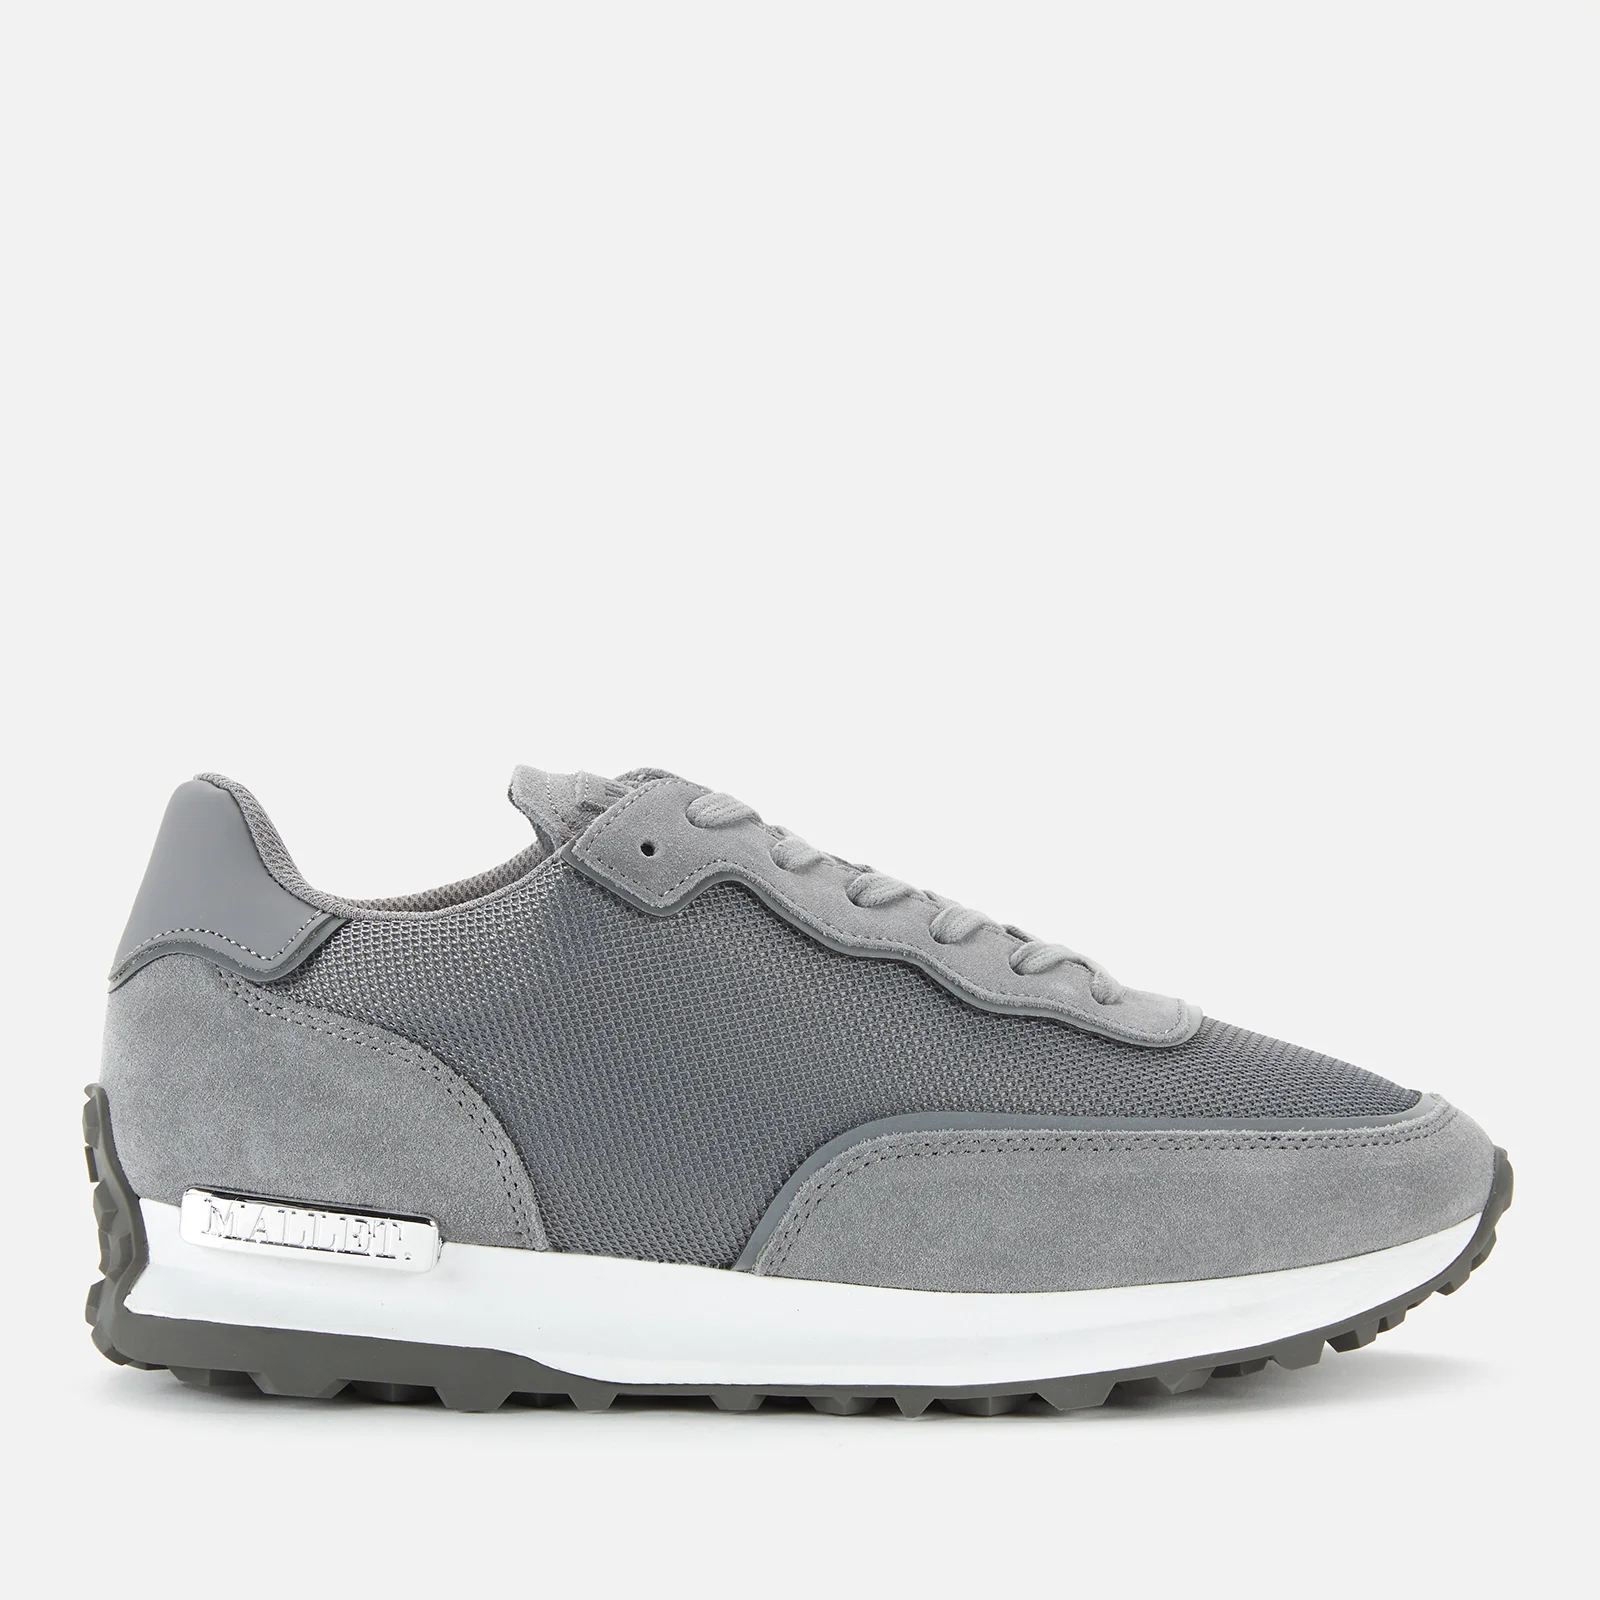 MALLET Men's Caledonian Mesh Running Style Trainers - Grey Image 1